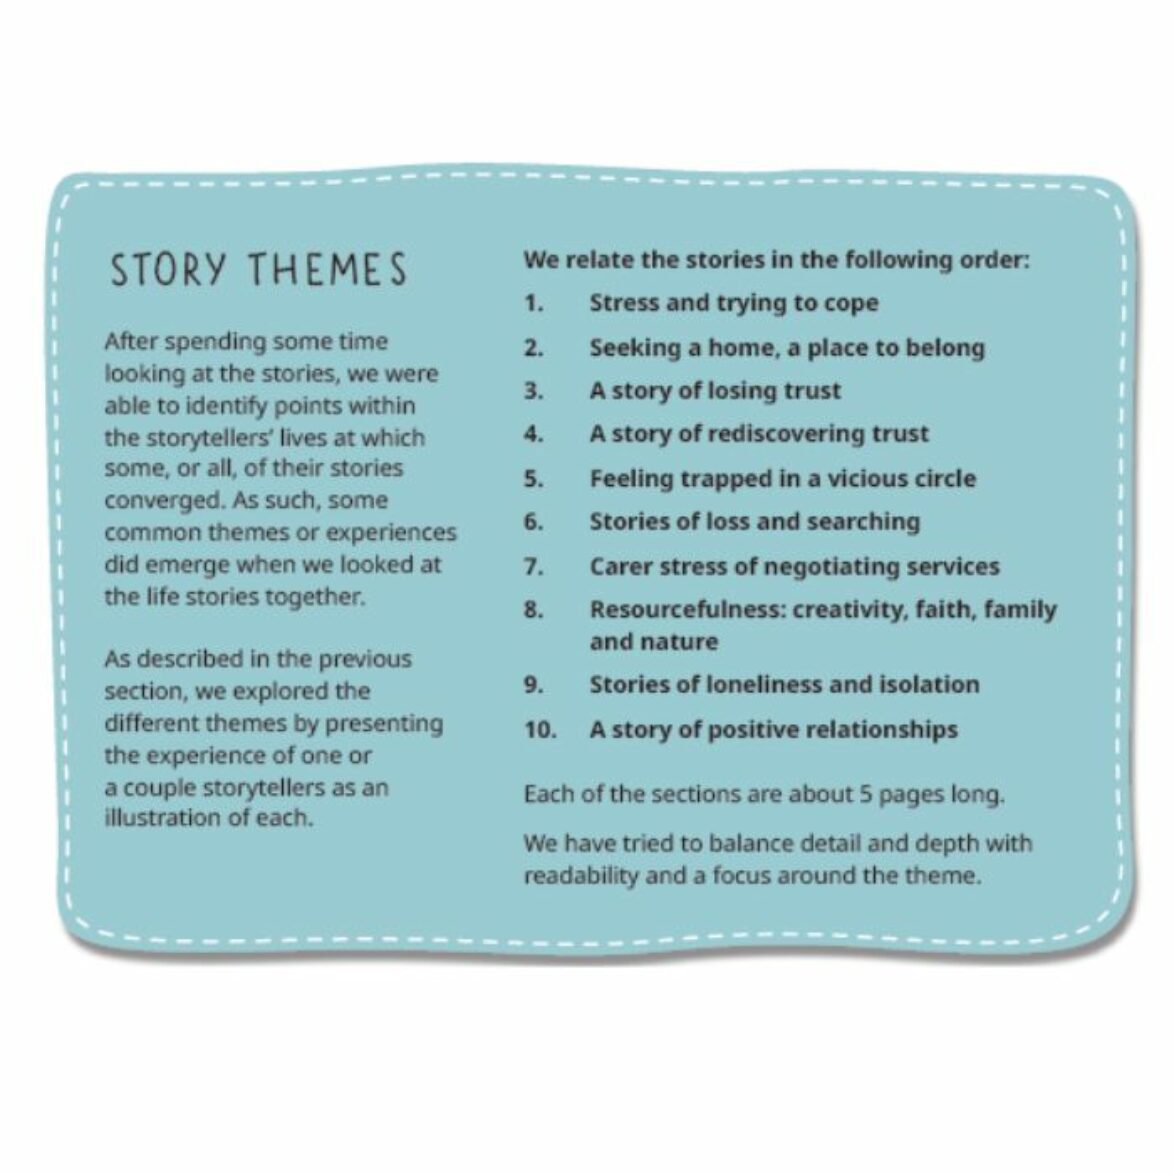 An illustrated list of the 10 story themes from the My Story Our Future Project.